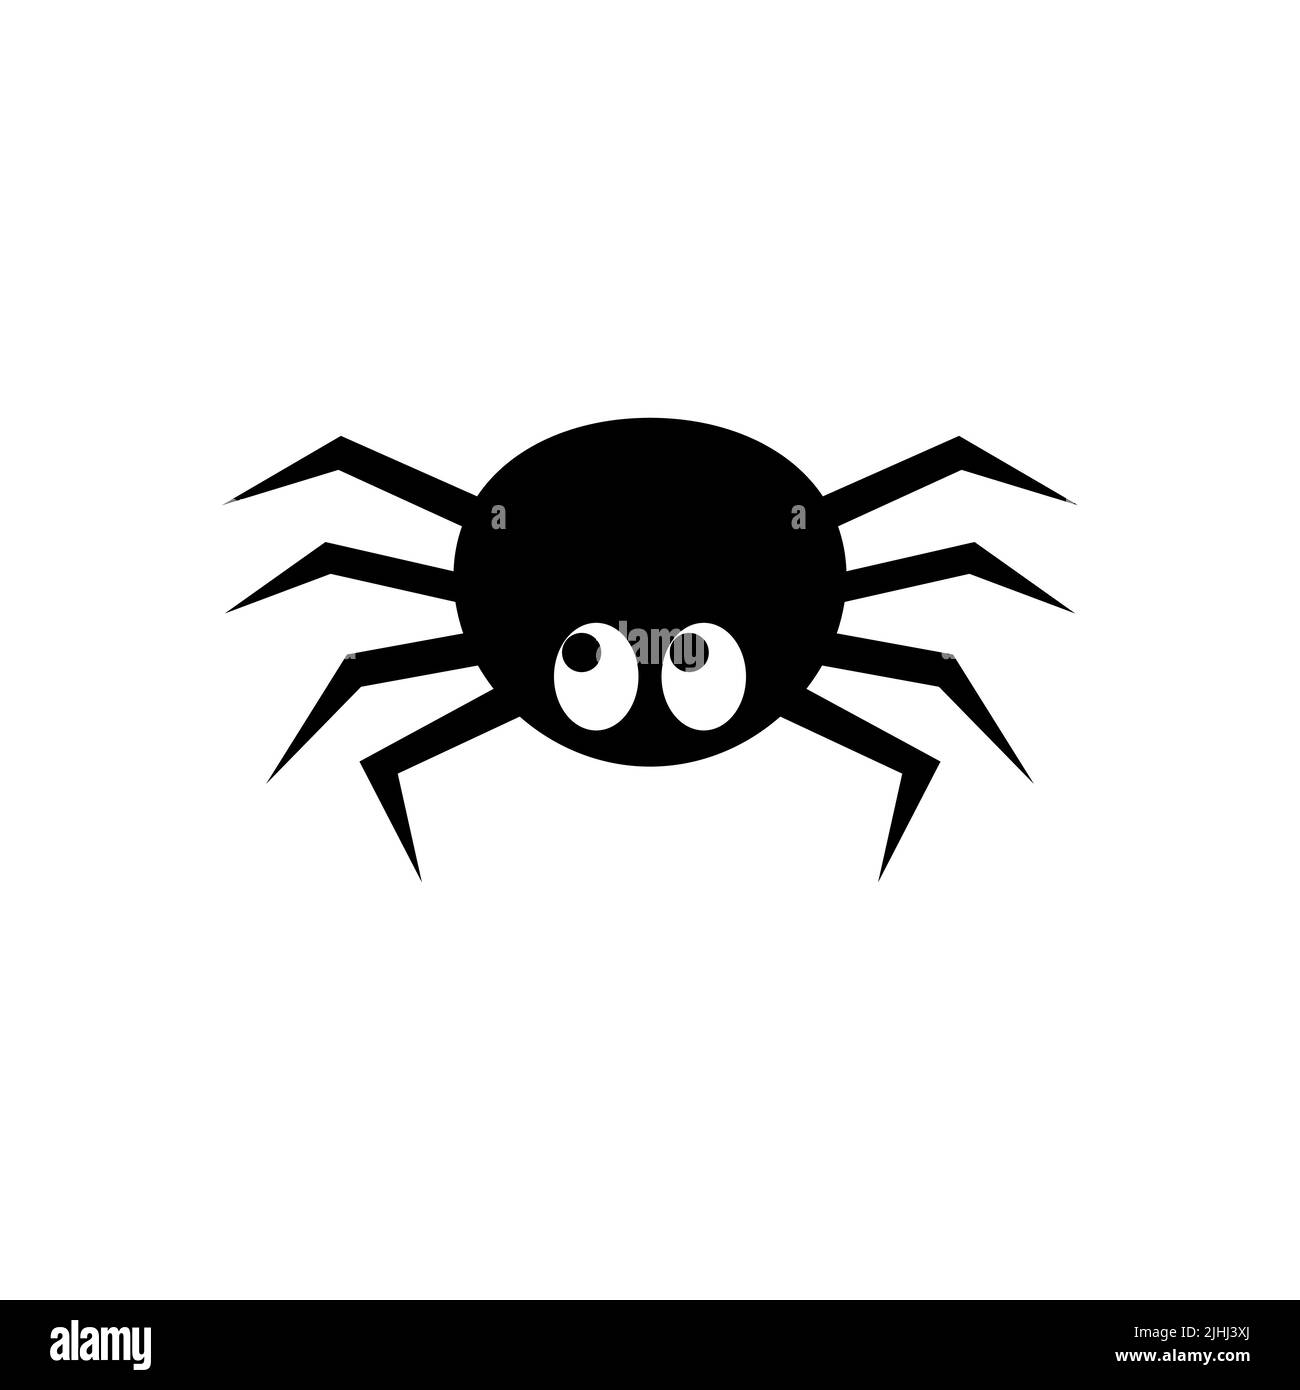 Spider icon isolated on white background. Vector illustration Stock Vector